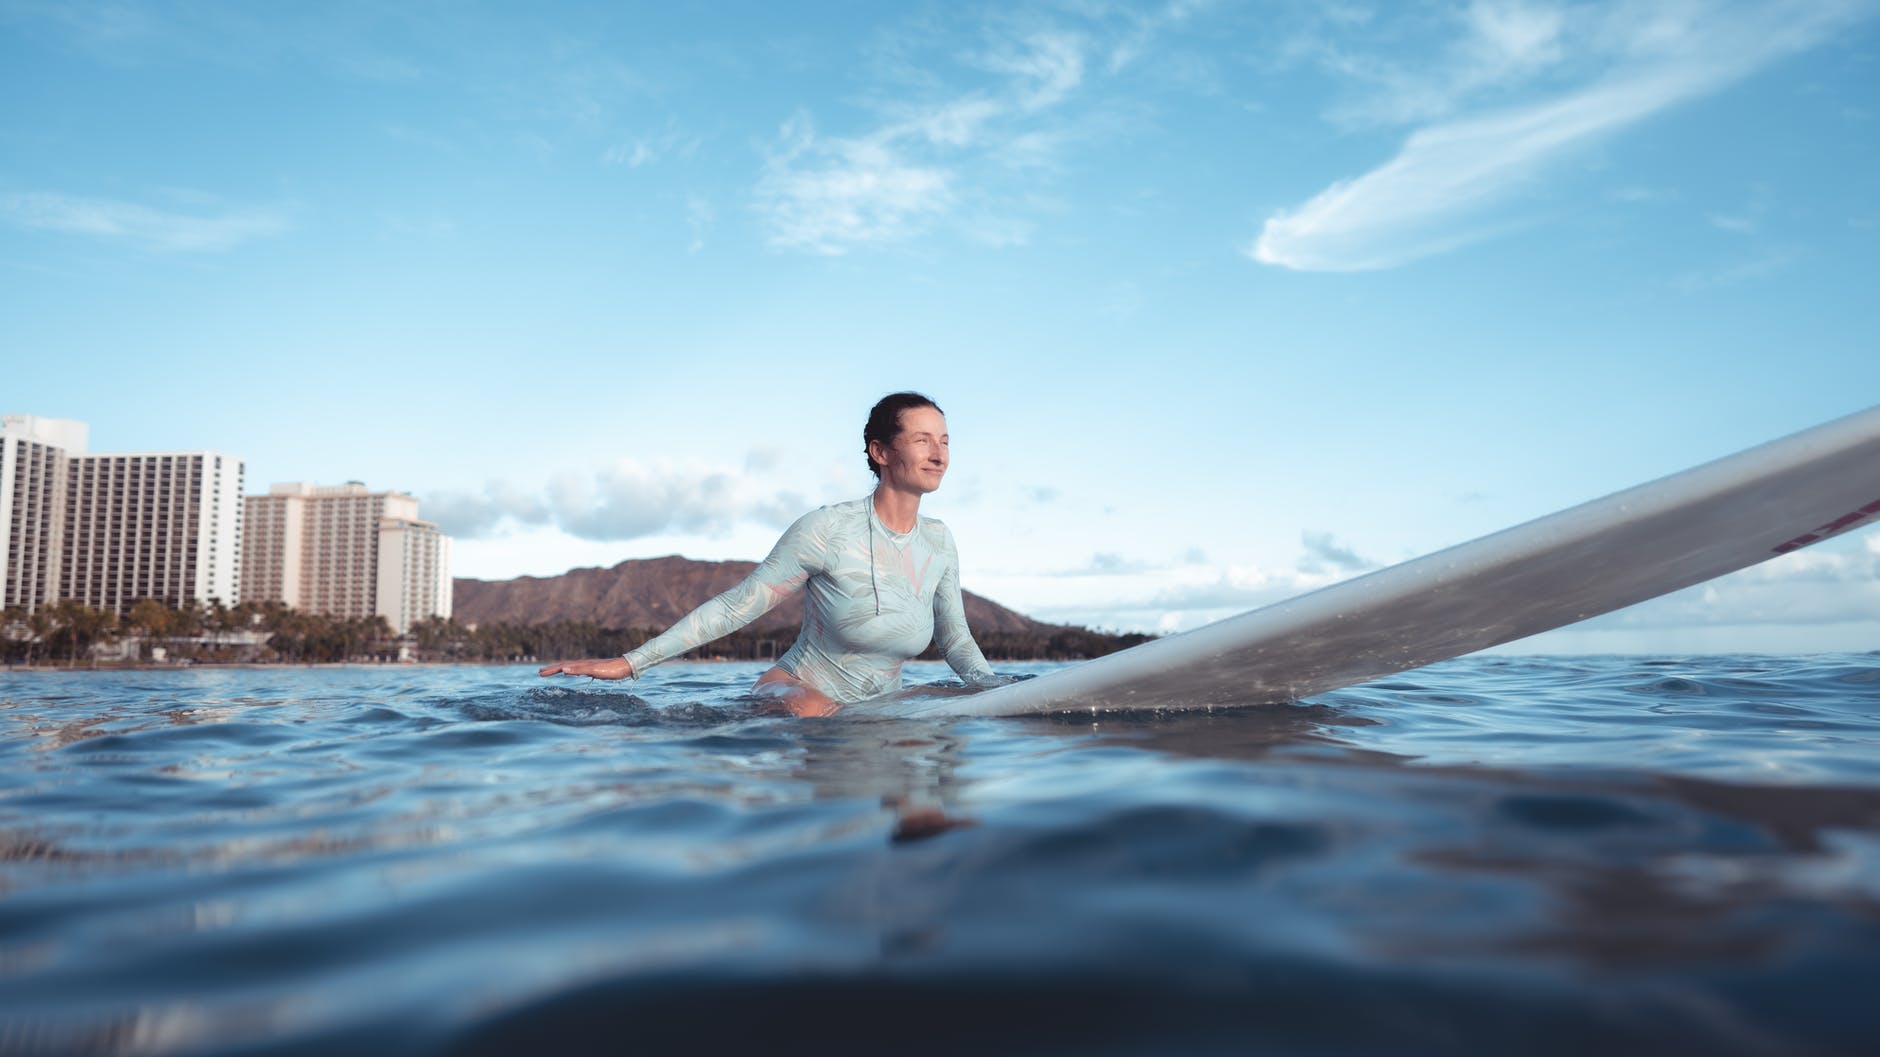 sporty young lady sitting on surfboard in ocean